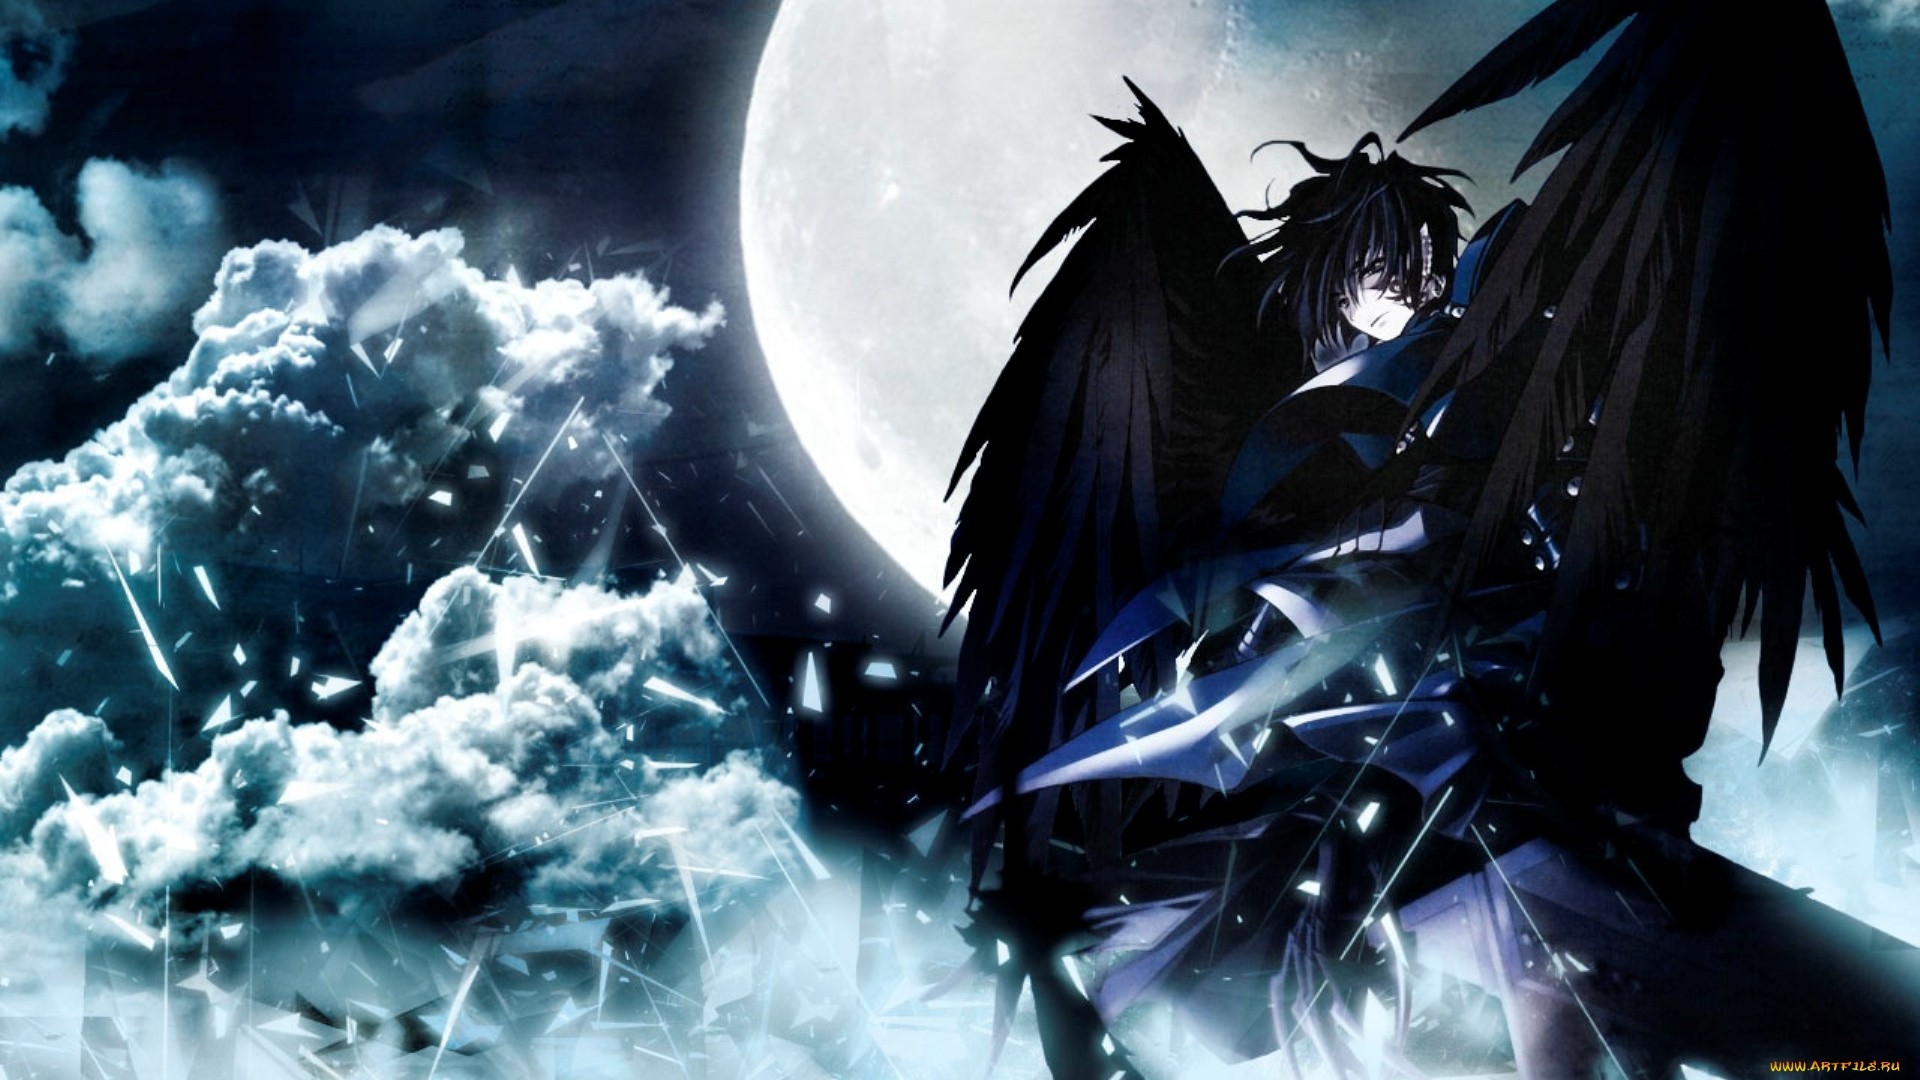 Cool Anime Male Demon Wallpapers Wallpapers